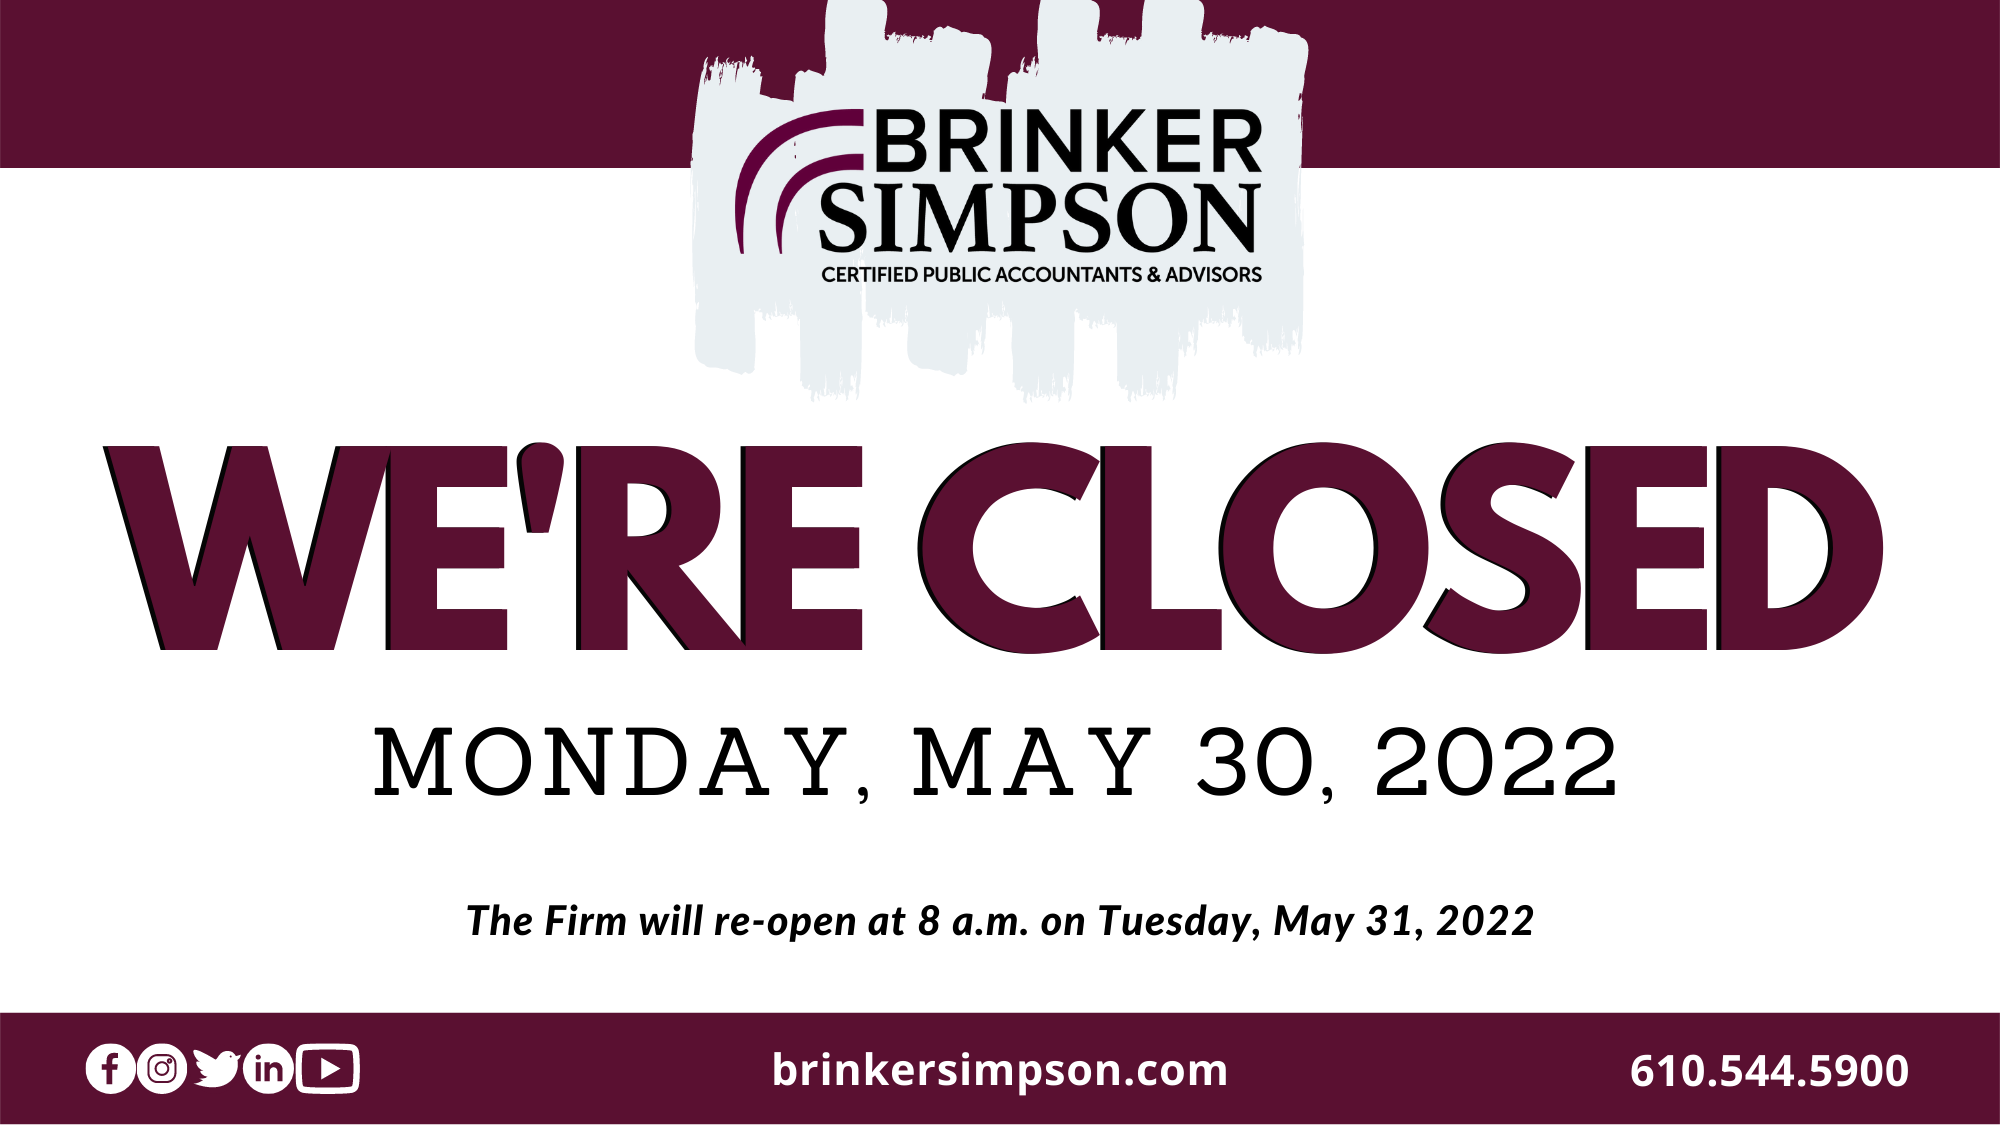 Our Office Will Be Closed on Monday, May 30